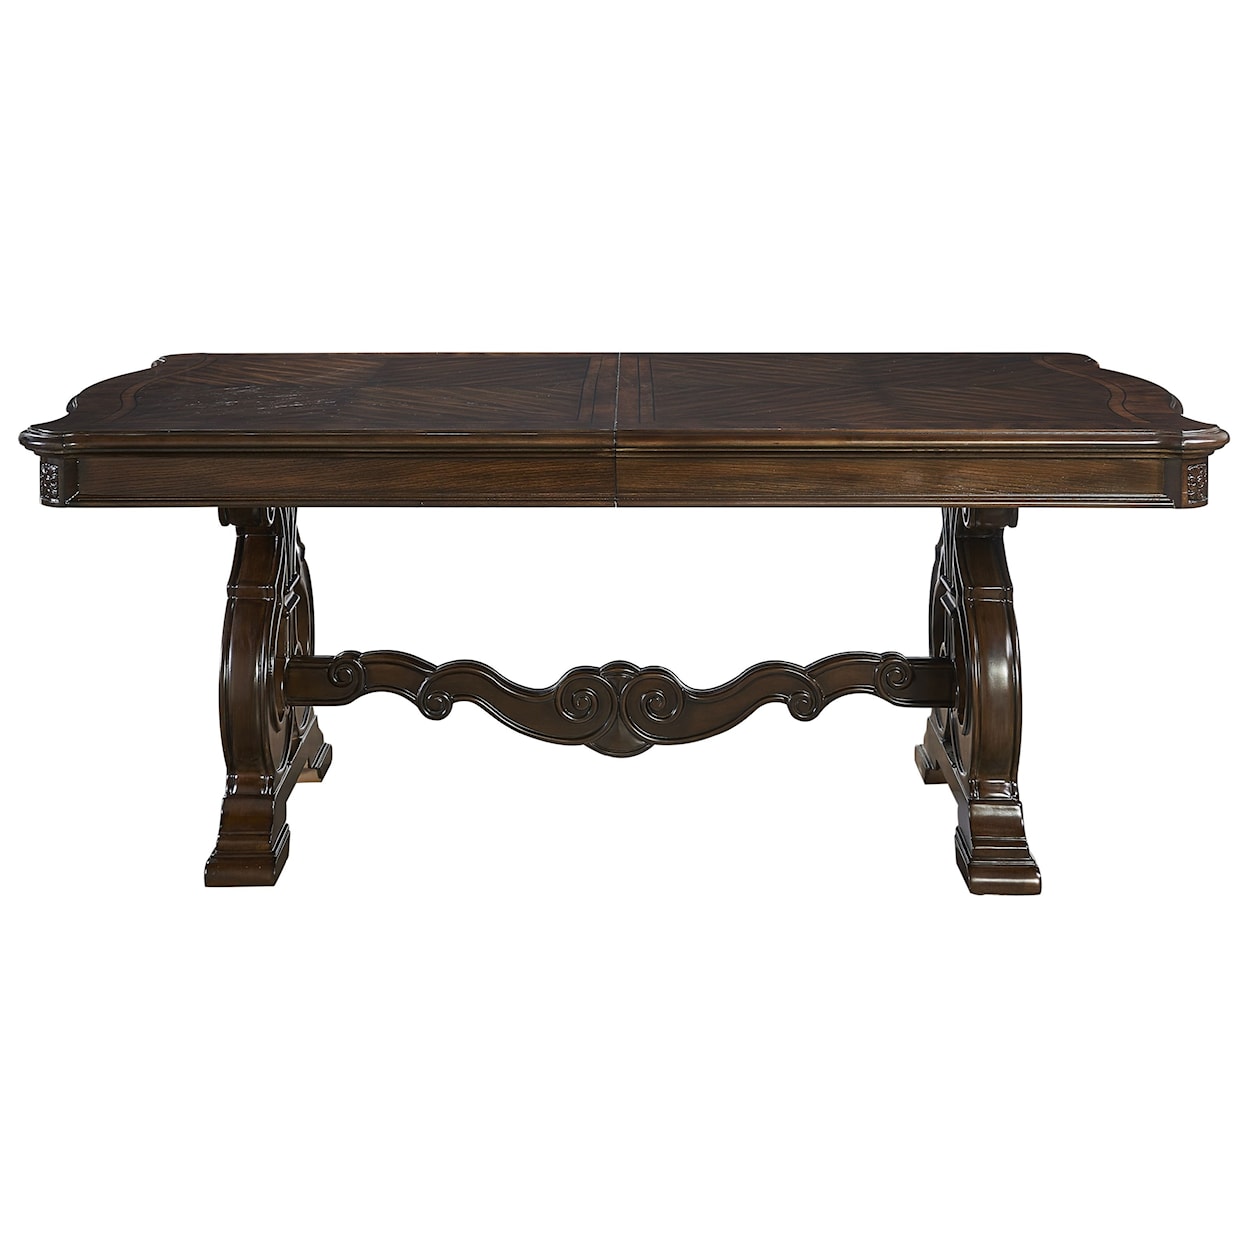 Steve Silver Royale Cathedral Veneer Dining Table